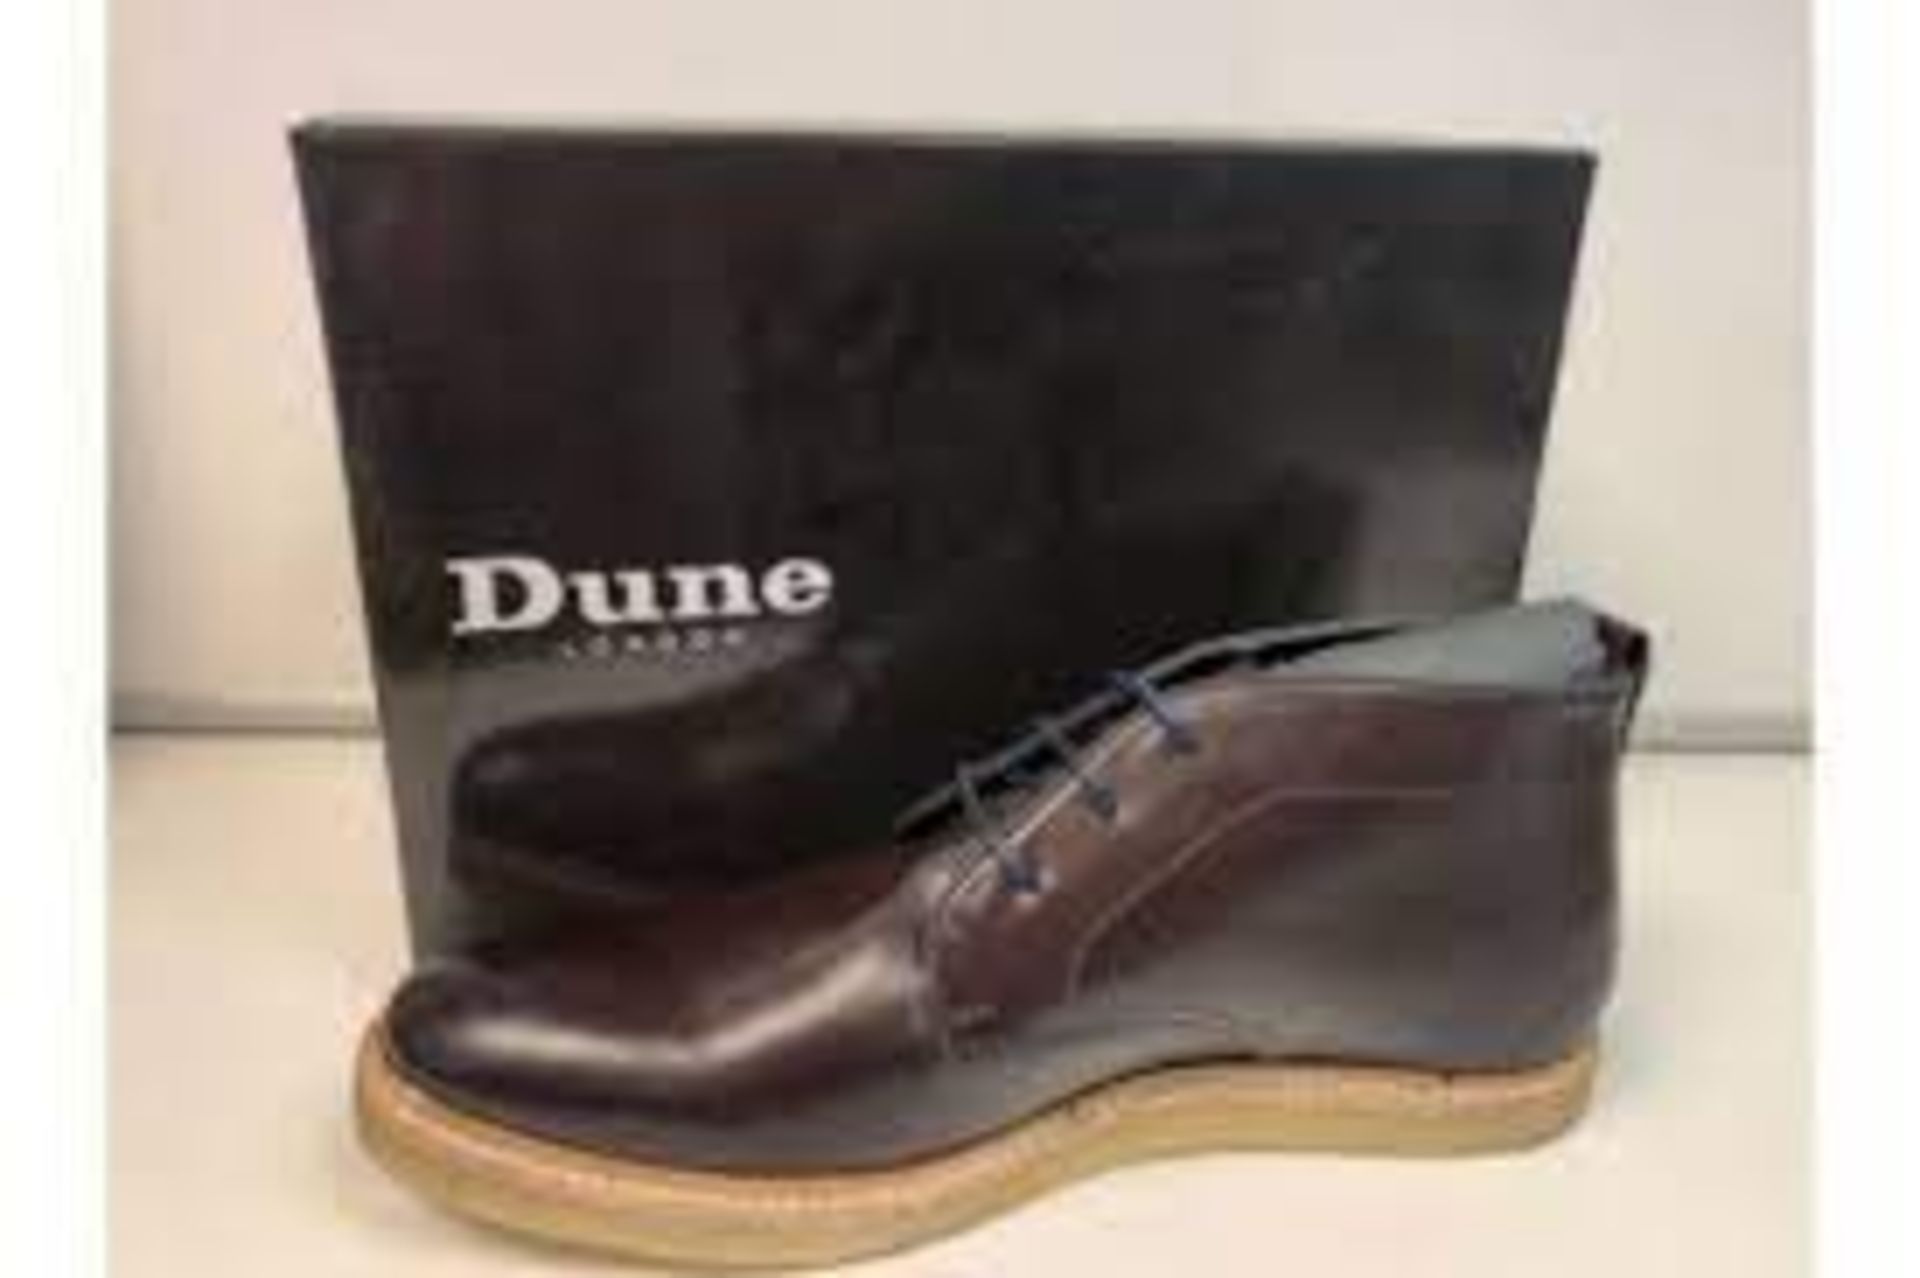 BRAND NEW DUNE LONDON DARK BROWN LEATHER BOOTS SIZE 8 RRP £129